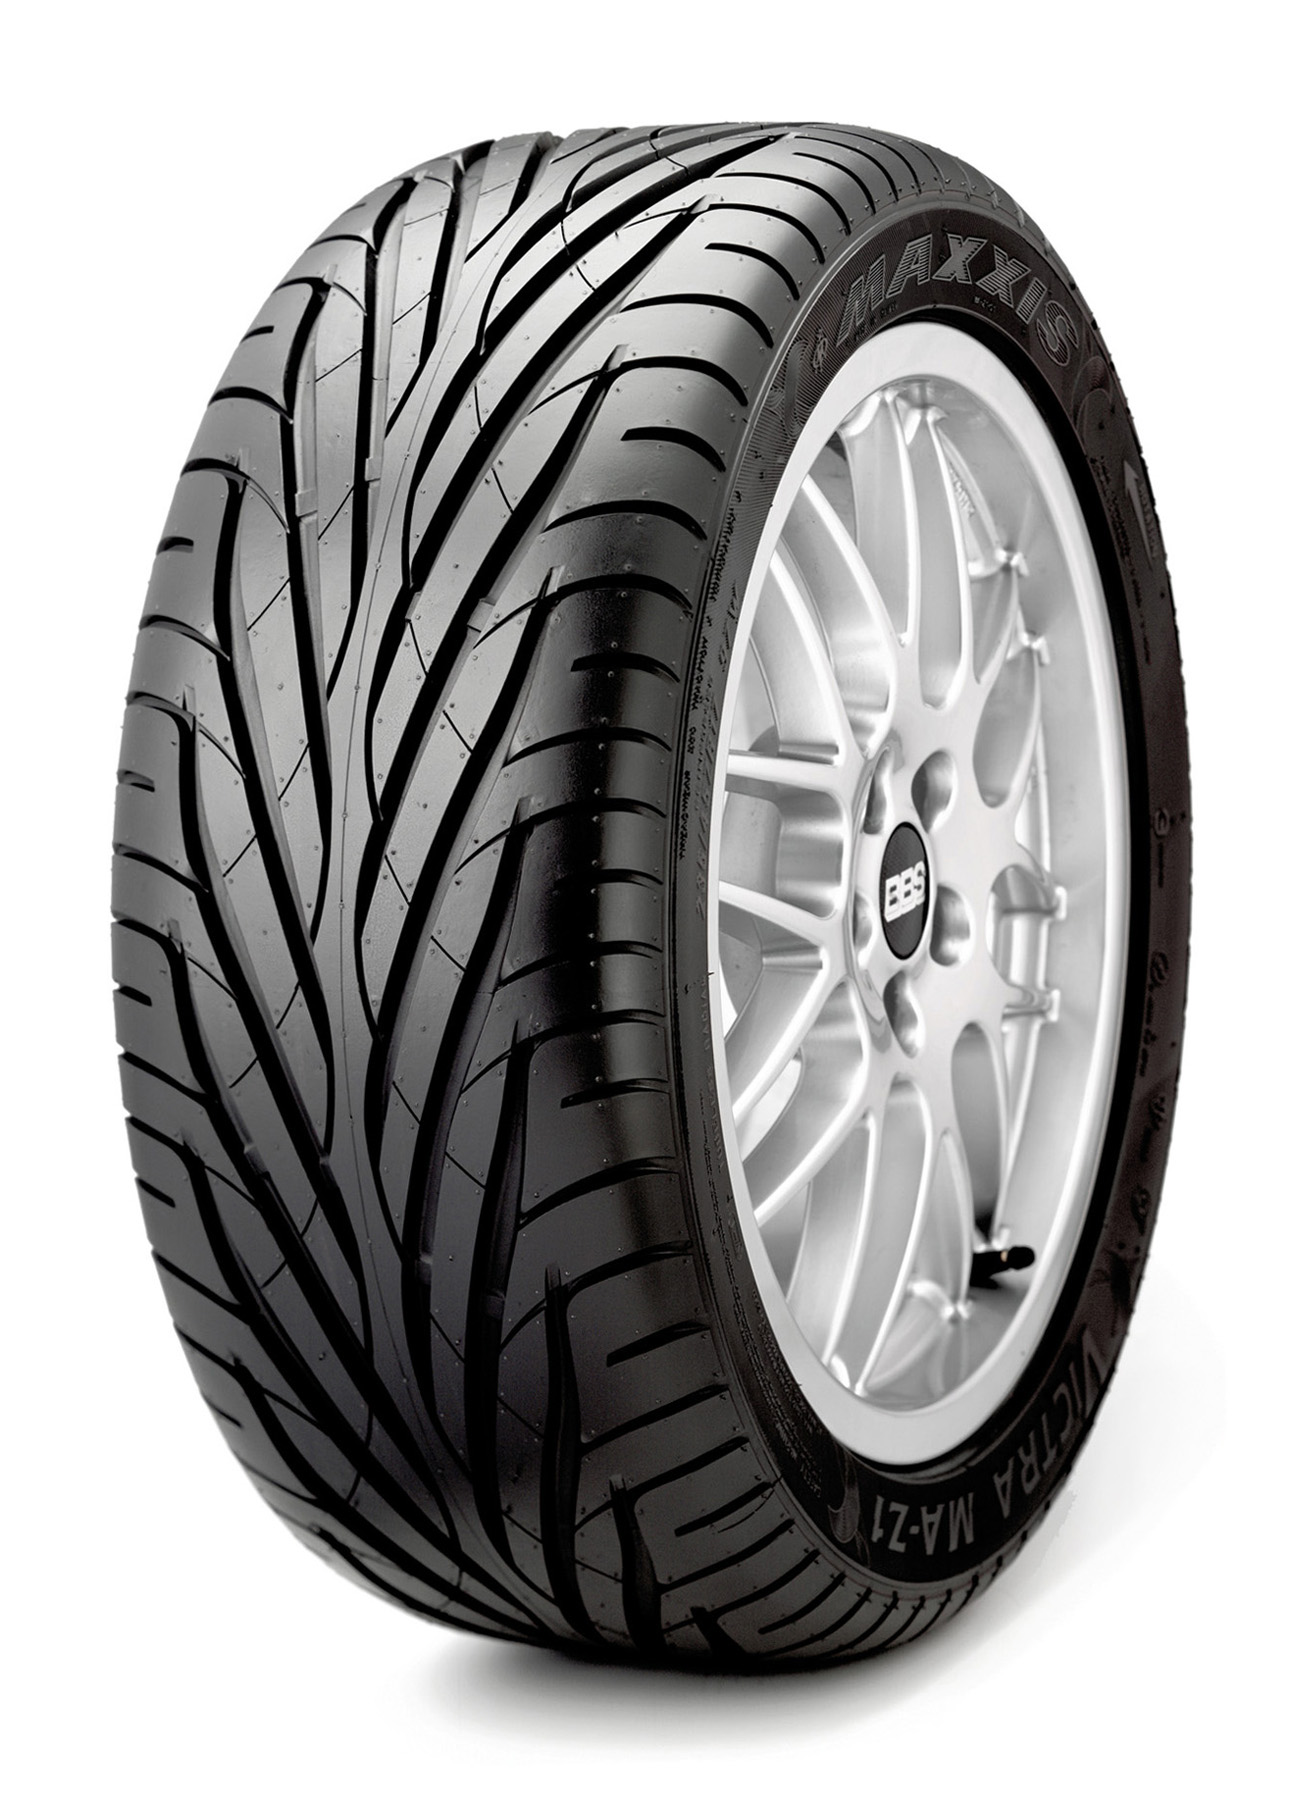 Резина maxxis victra sport. Maxxis ma-z1 Victra. 195/50r15, Maxxis ma-z1 Victra 86v. Maxxis ma-z1 94w. Maxxis 195/50r15 ma-z4 Victra.